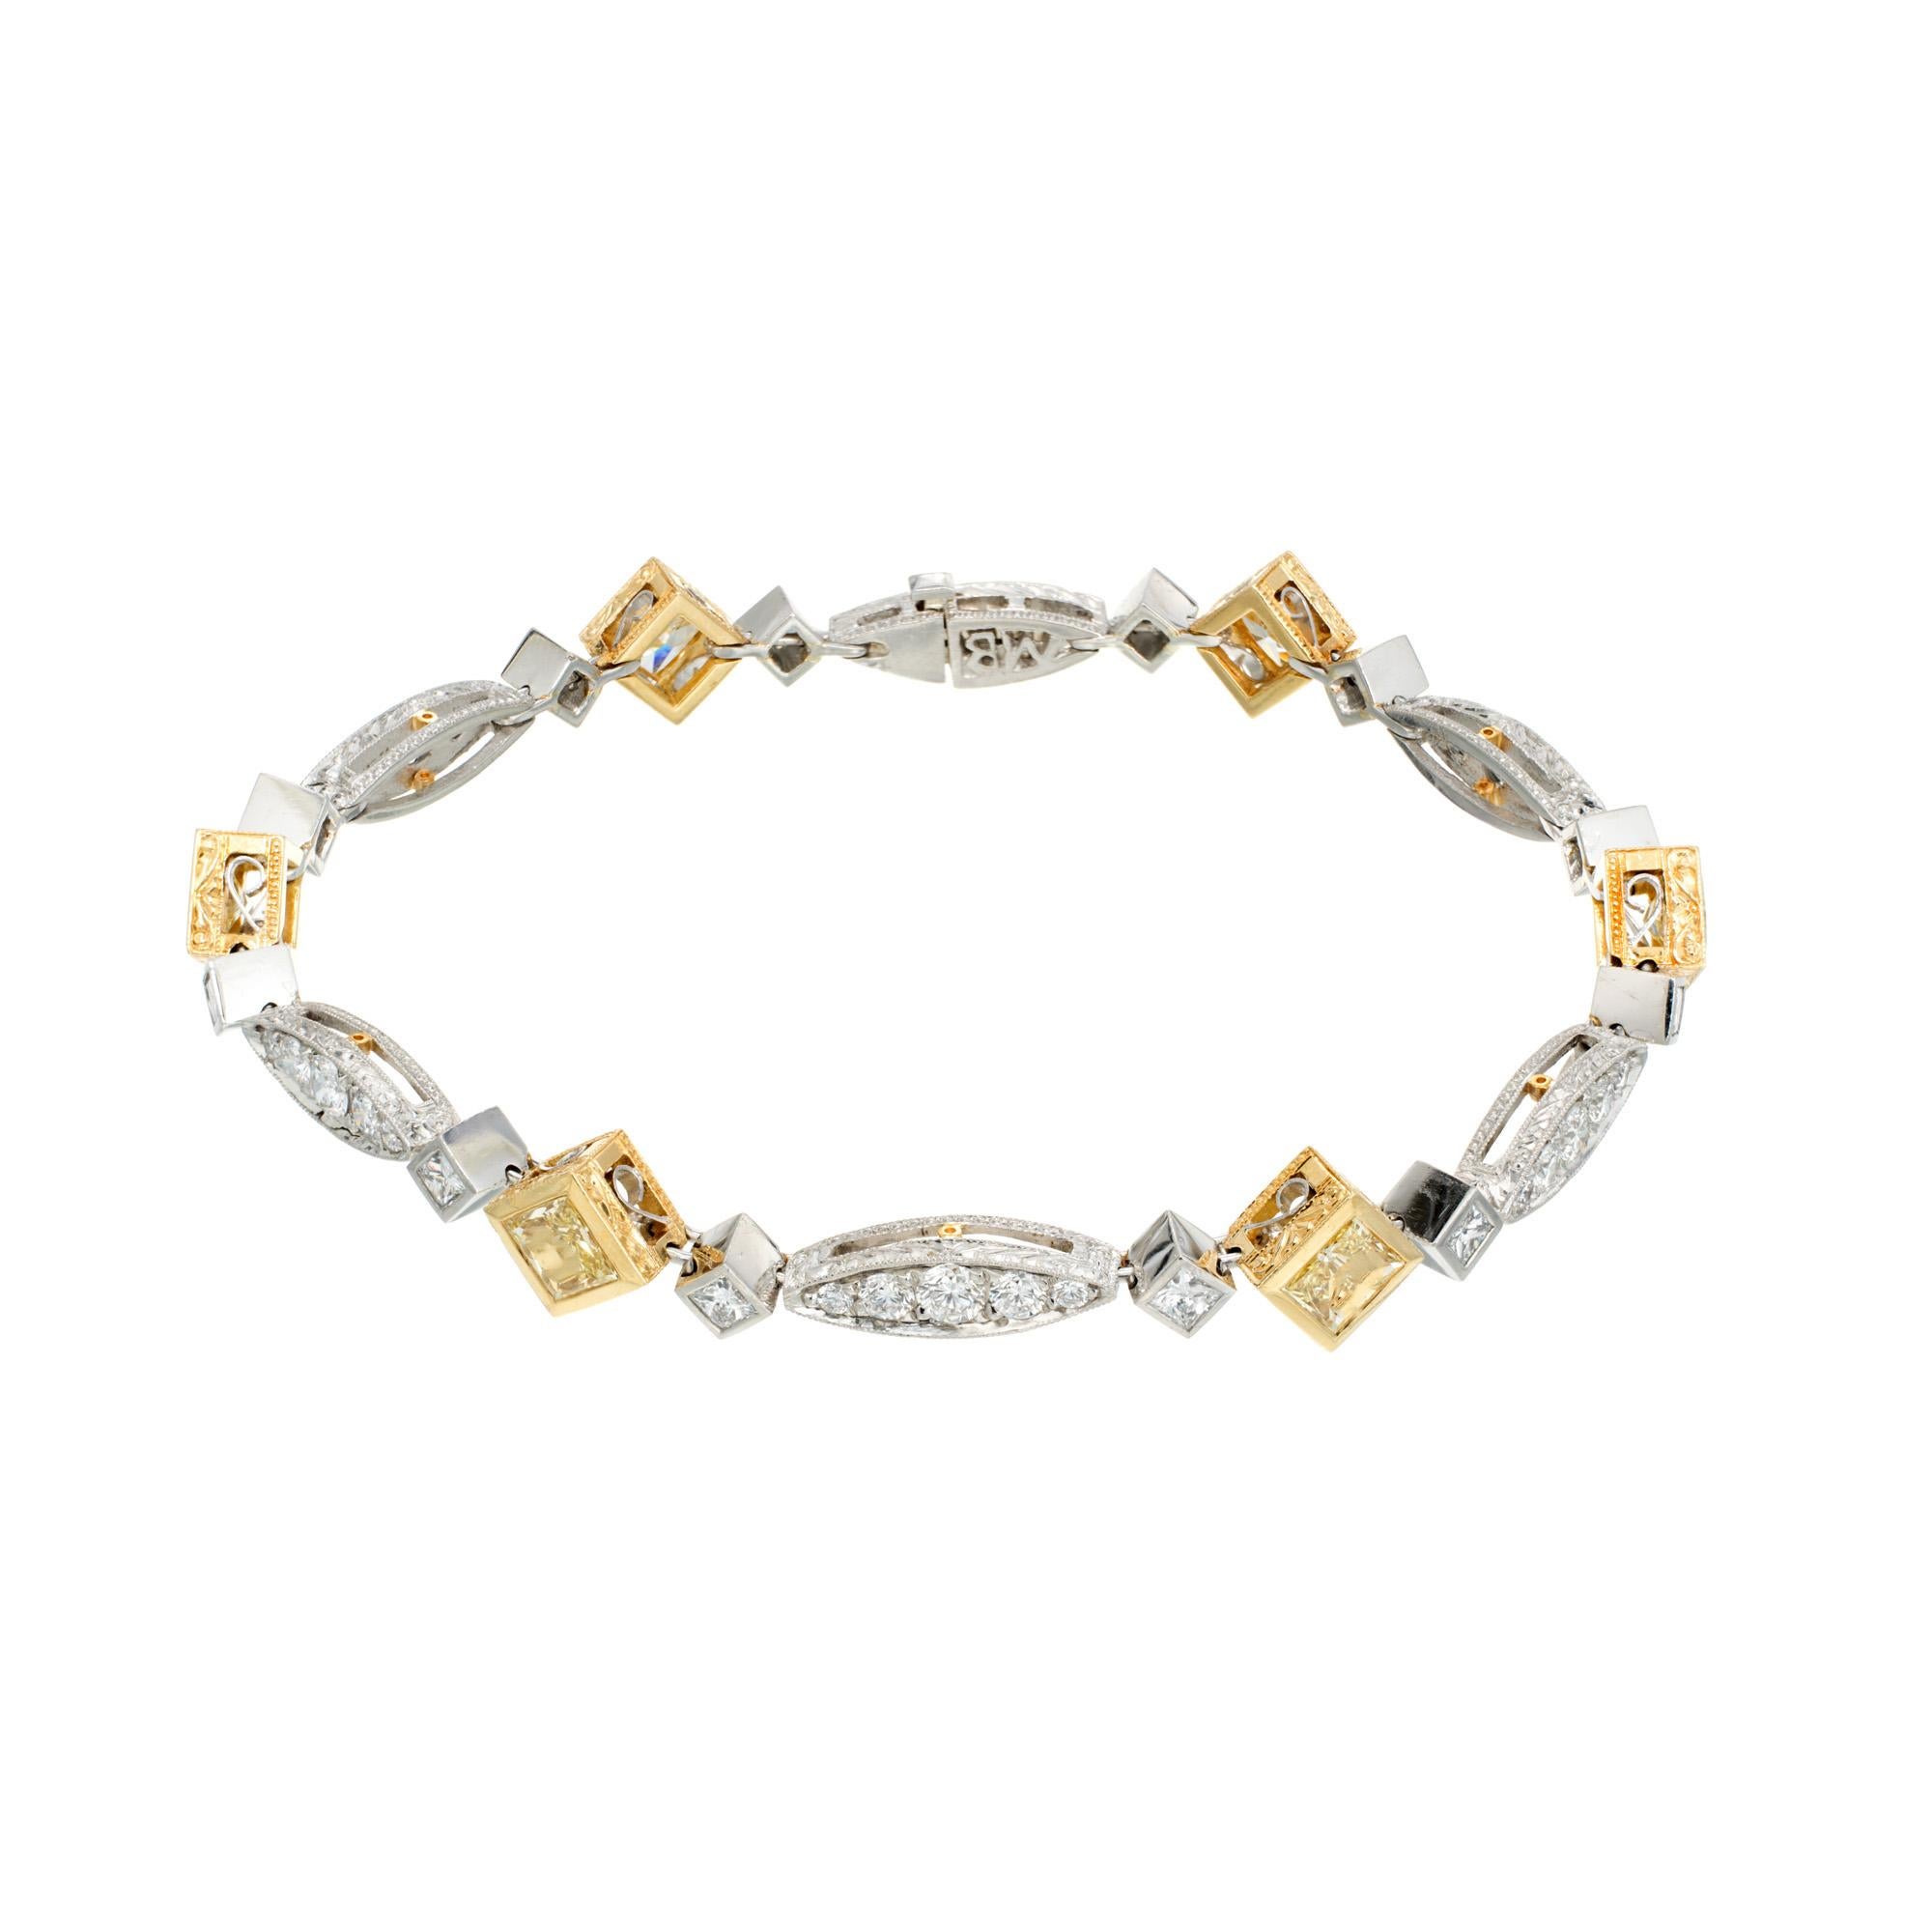 Michael Beaudry yellow and white diamond bracelet. 12 princess cut tube bezel set diamonds set in Platinum tubes accented with 6 radiant cut natural fancy yellow diamonds set in 18k yellow gold frames. 30 round cut diamonds of varying sizes finish